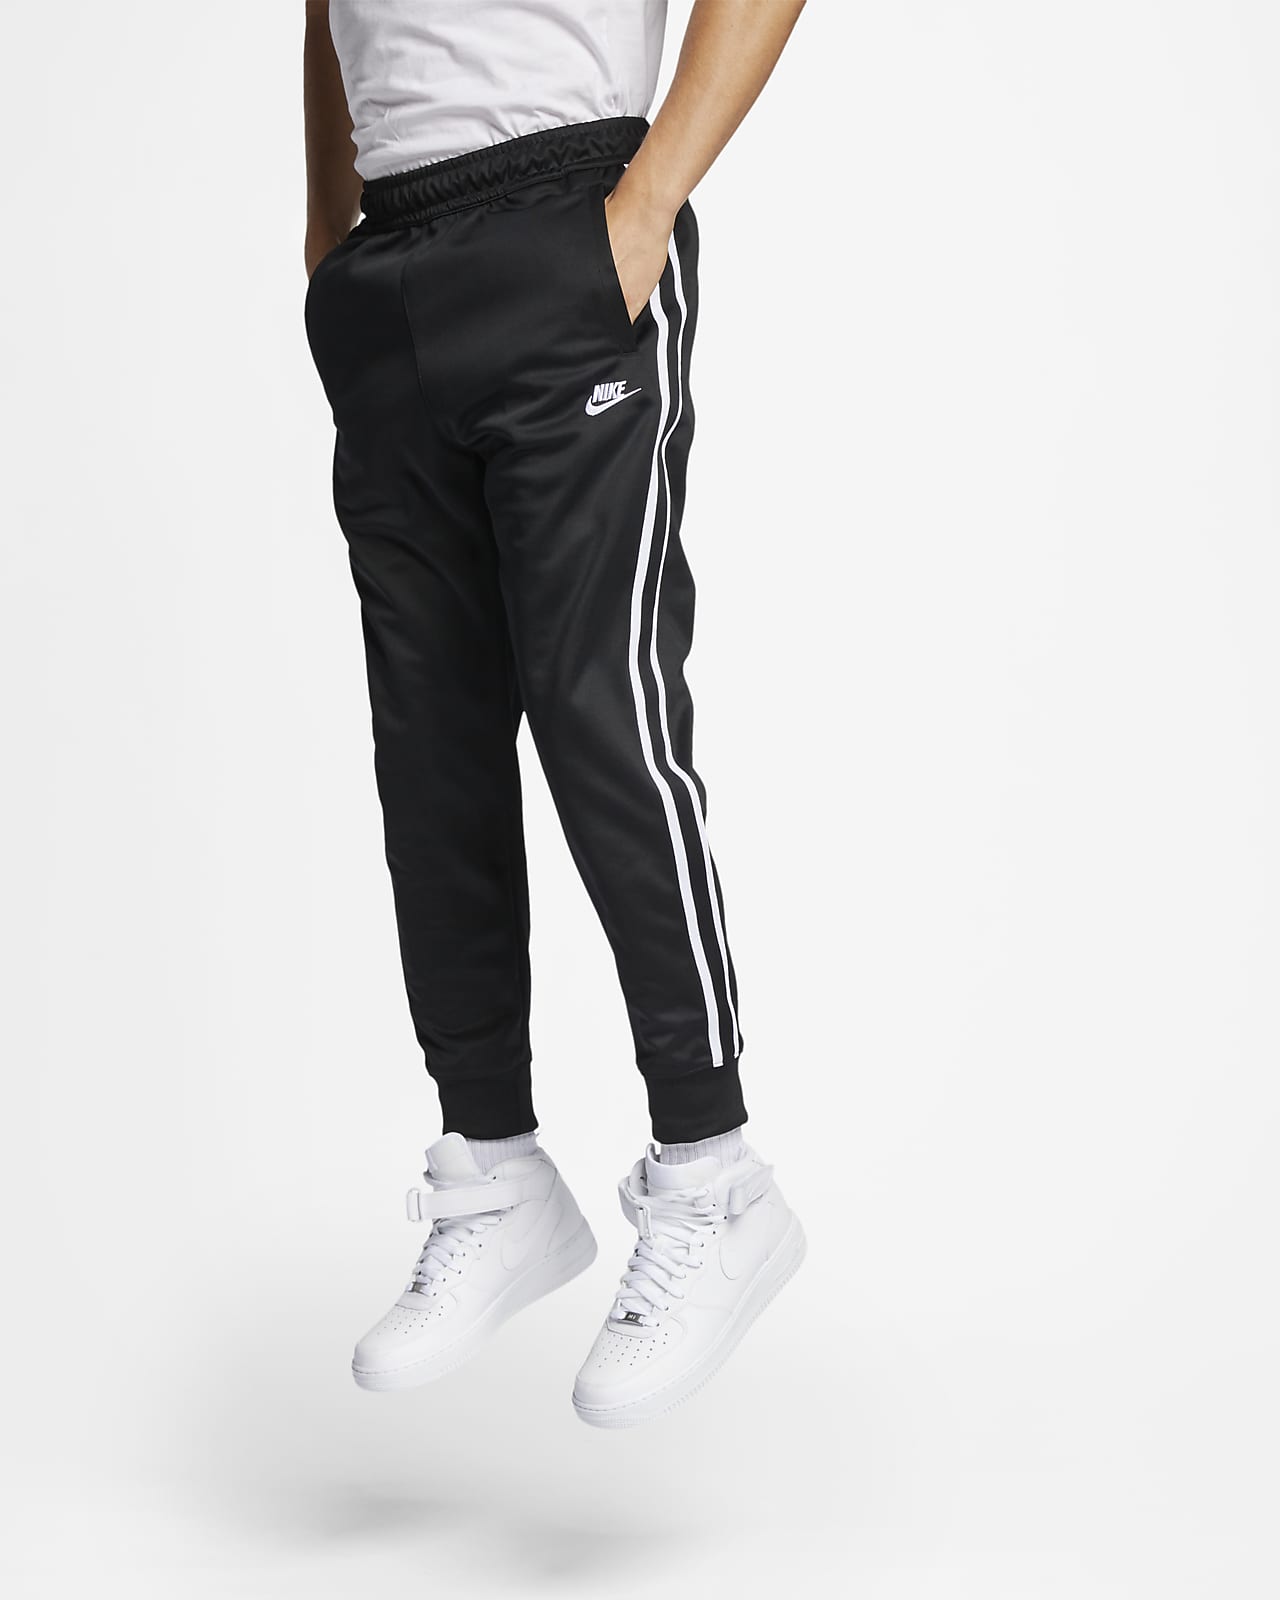 Buy > nike thick joggers > in stock